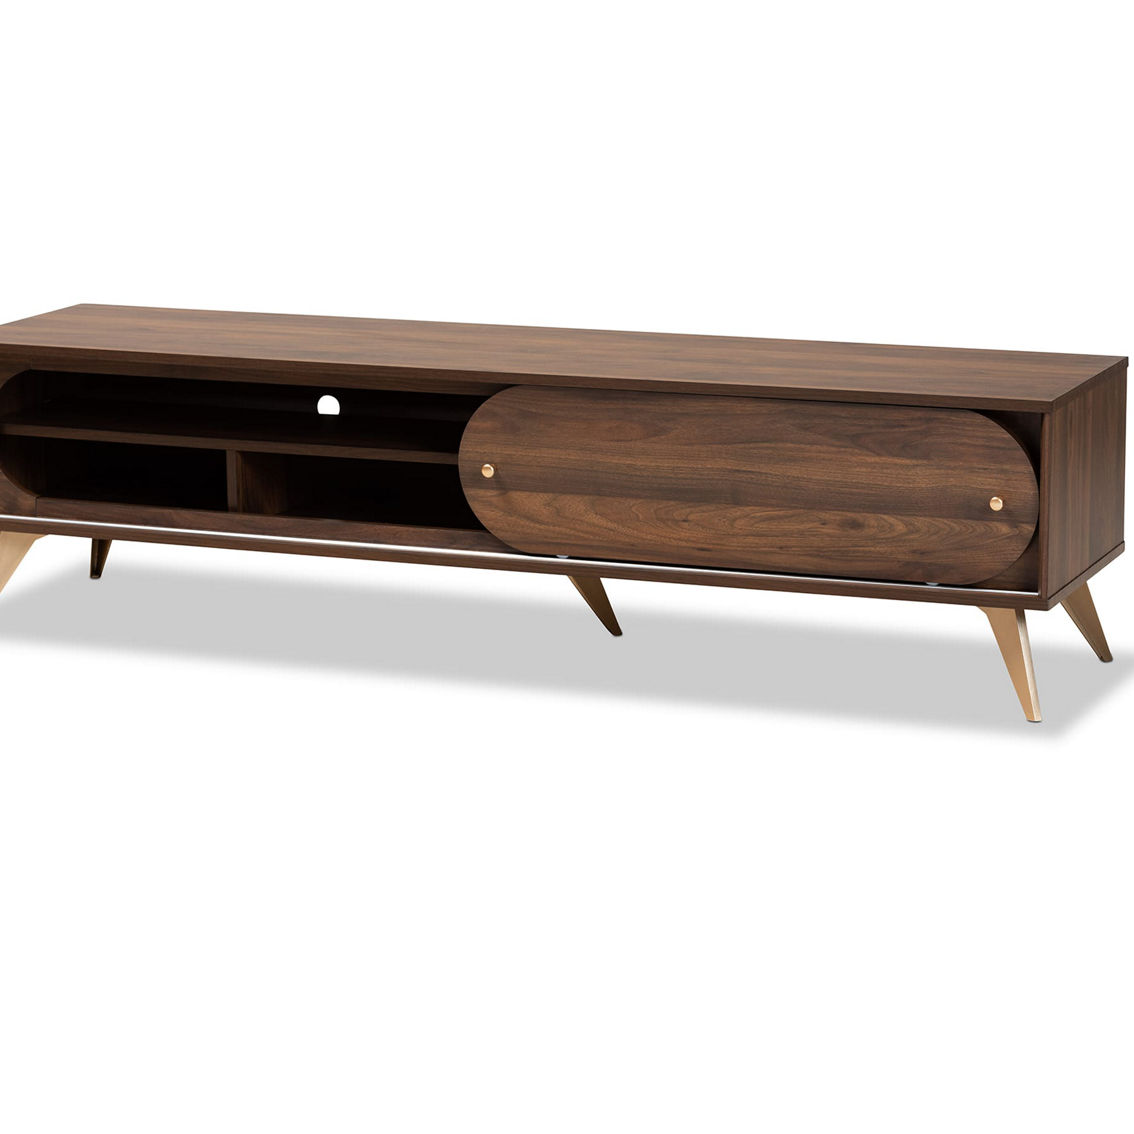 Baxton Studio Dena Walnut Brown Wood and Gold Finished TV Stand - Image 2 of 5